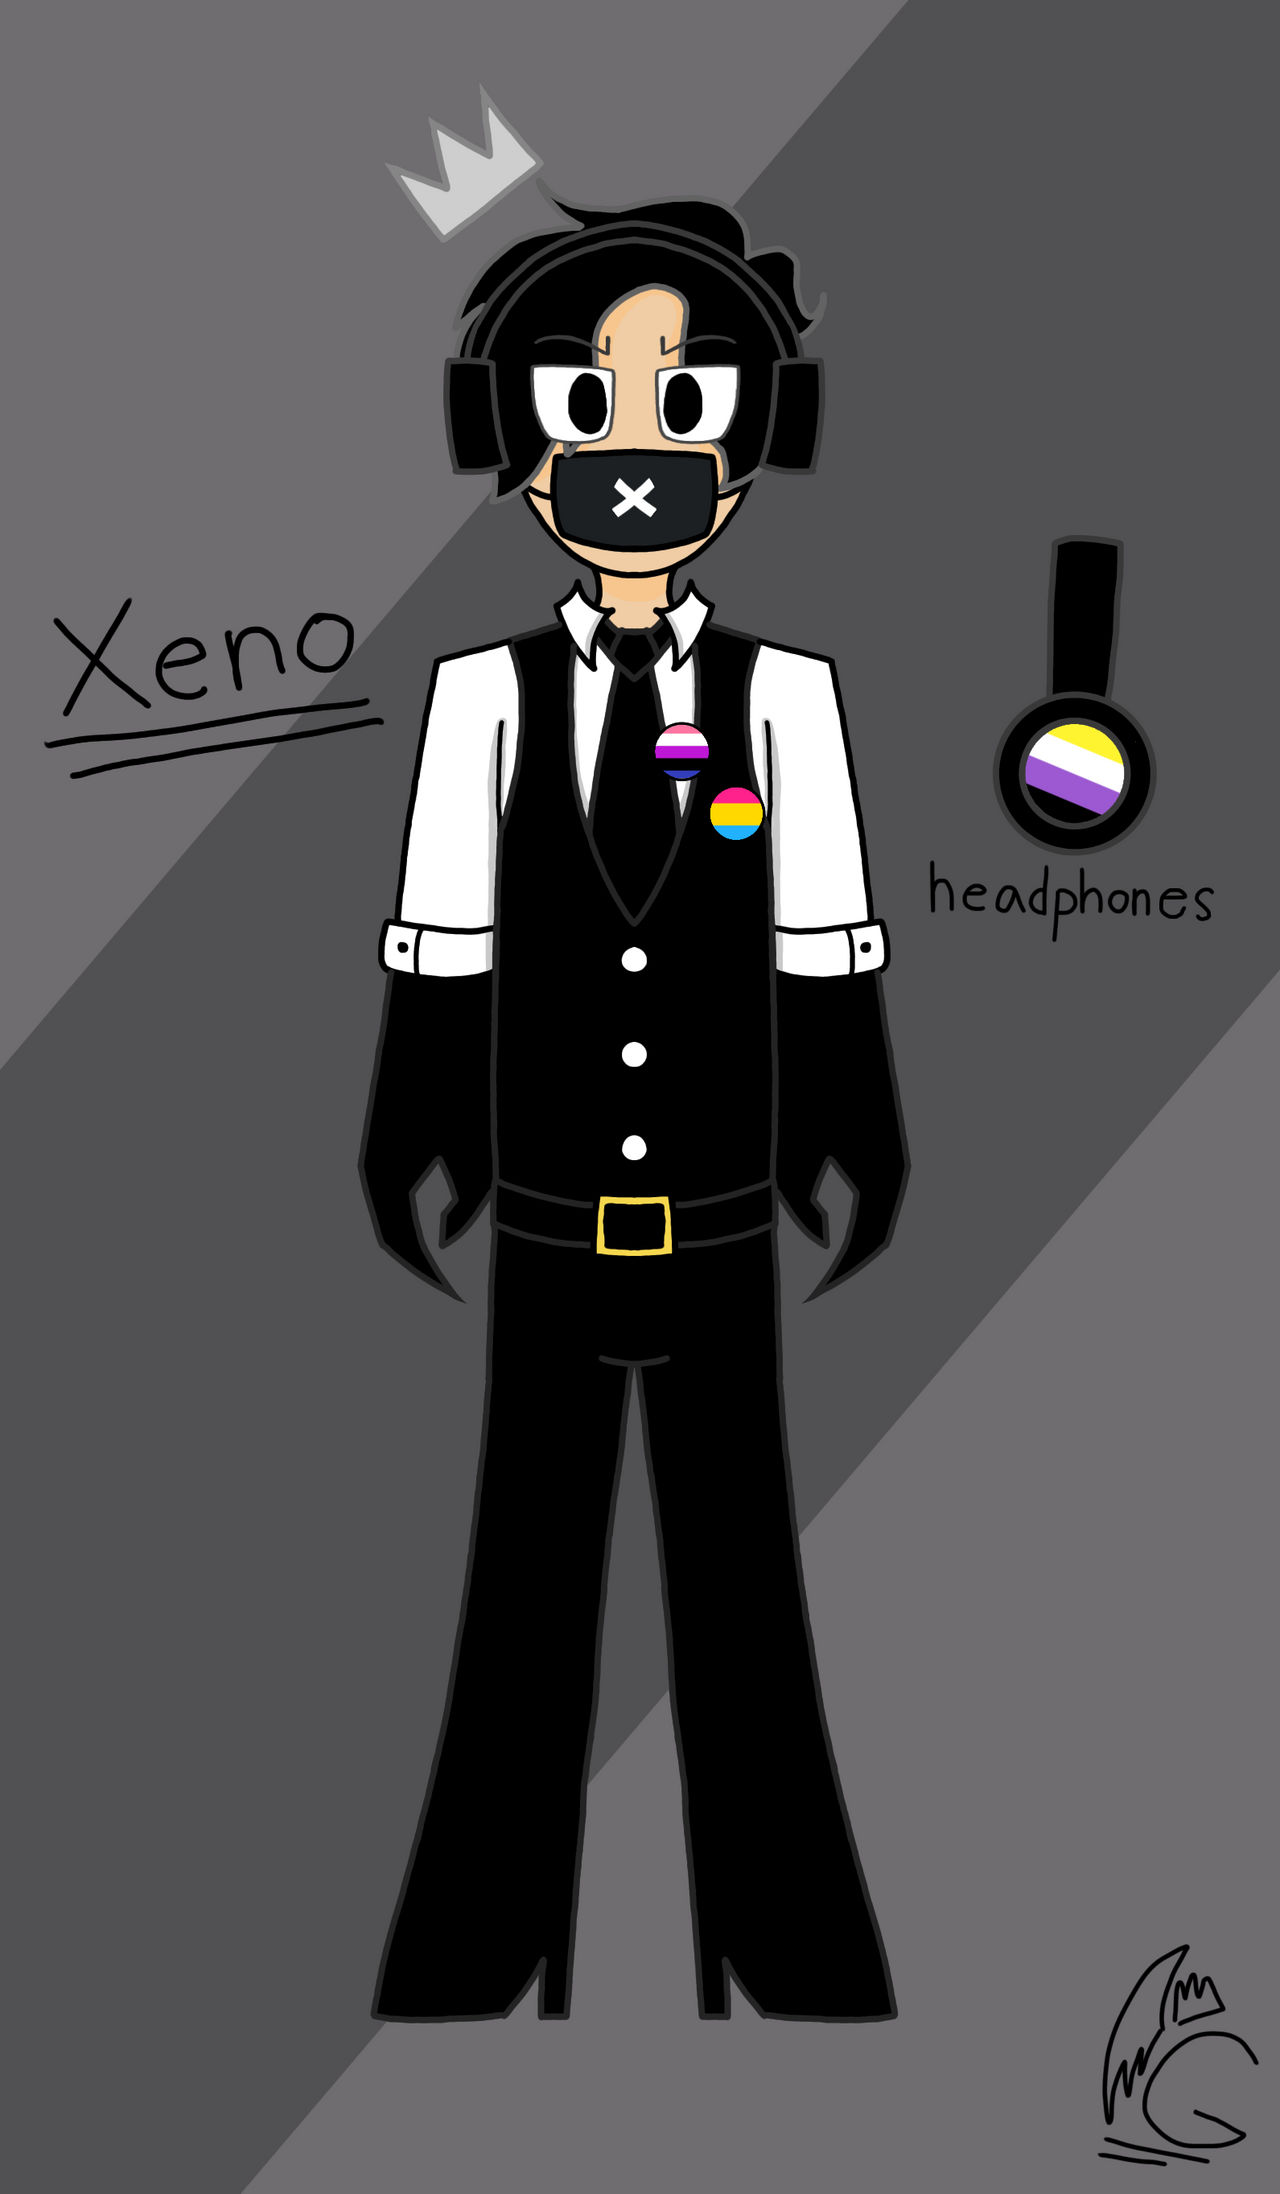 ozzy manic (she/her) on X: #robloxart #ROBLOX #exeoc #robloxexe i made a  roblox exe!! (awesome) their name is 'S1gnUP', they're c00lkidd  impersonating a guest ooo lore and stuff in the replies :3